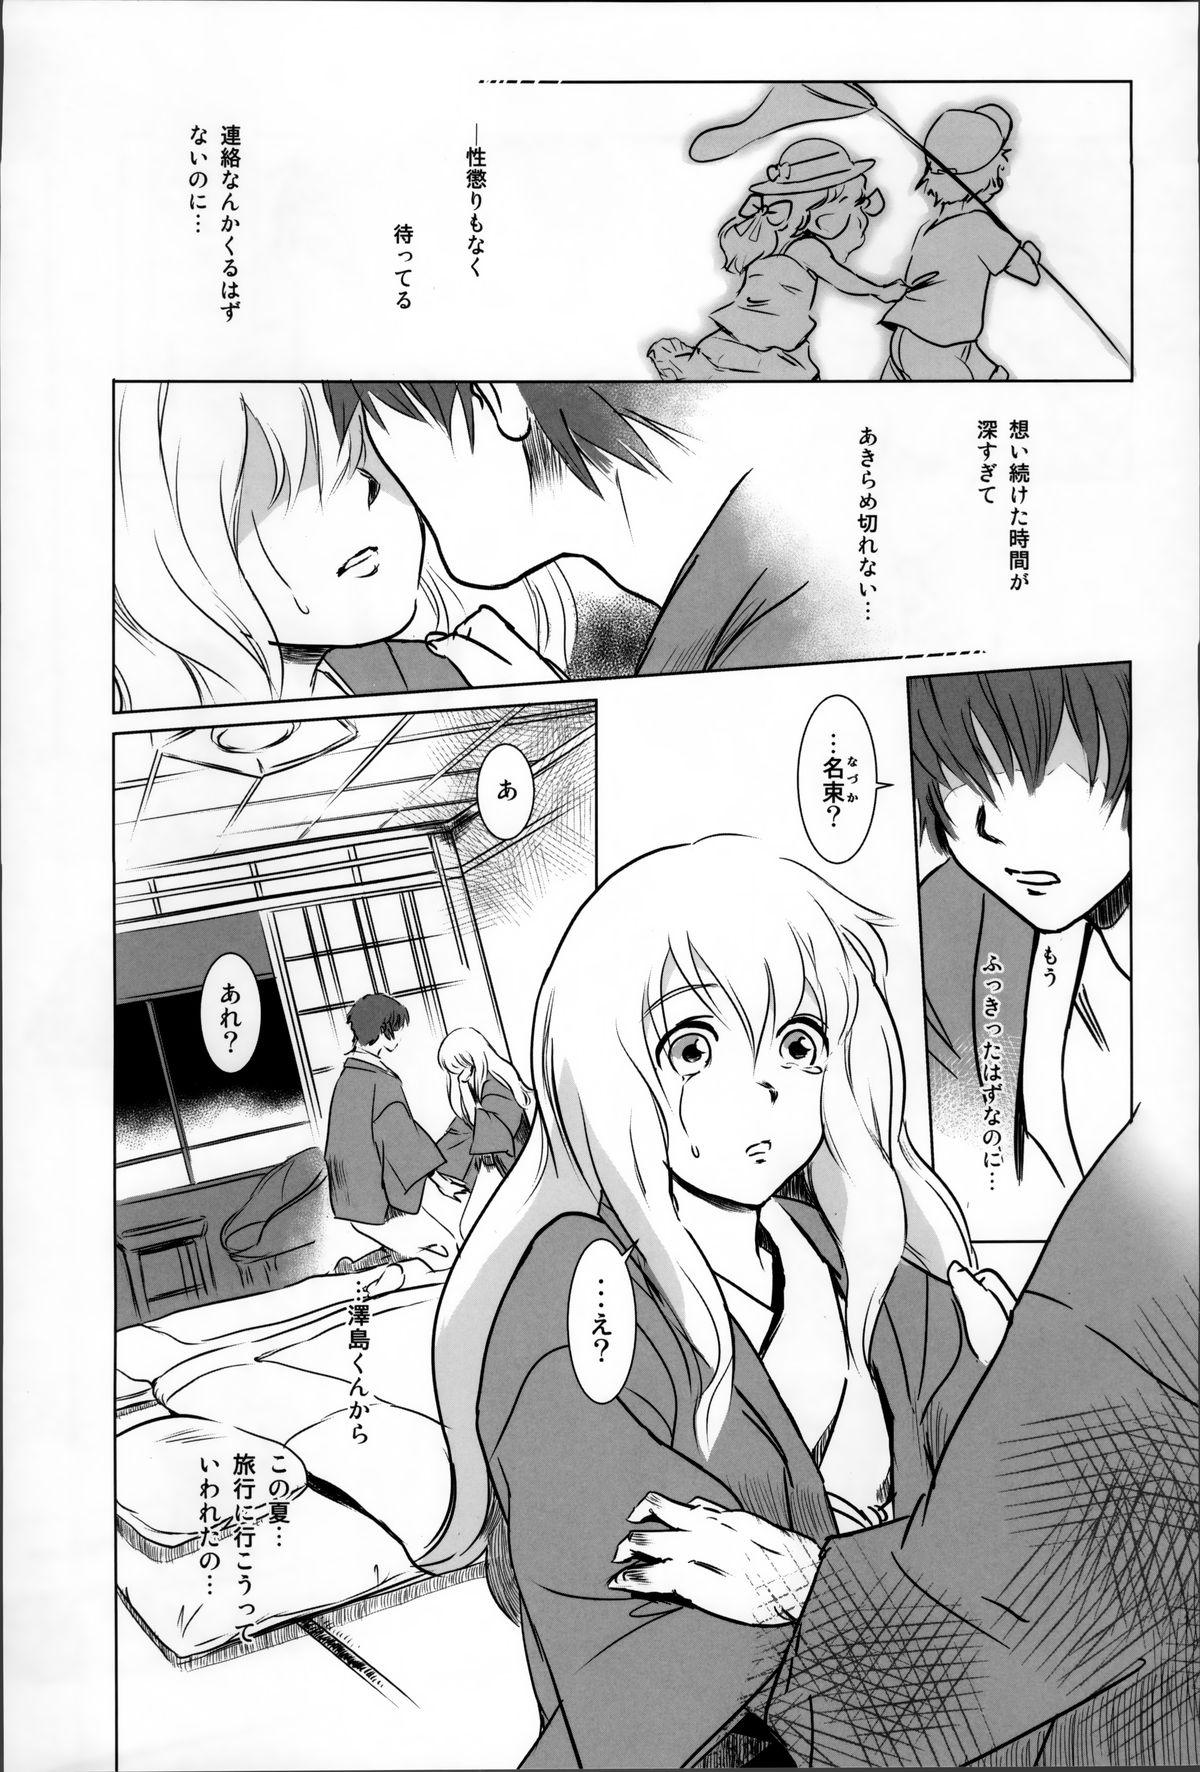 Hot Whores Story of the 'N' Situation - Situation#2 Kokoro Utsuri Para - Page 3